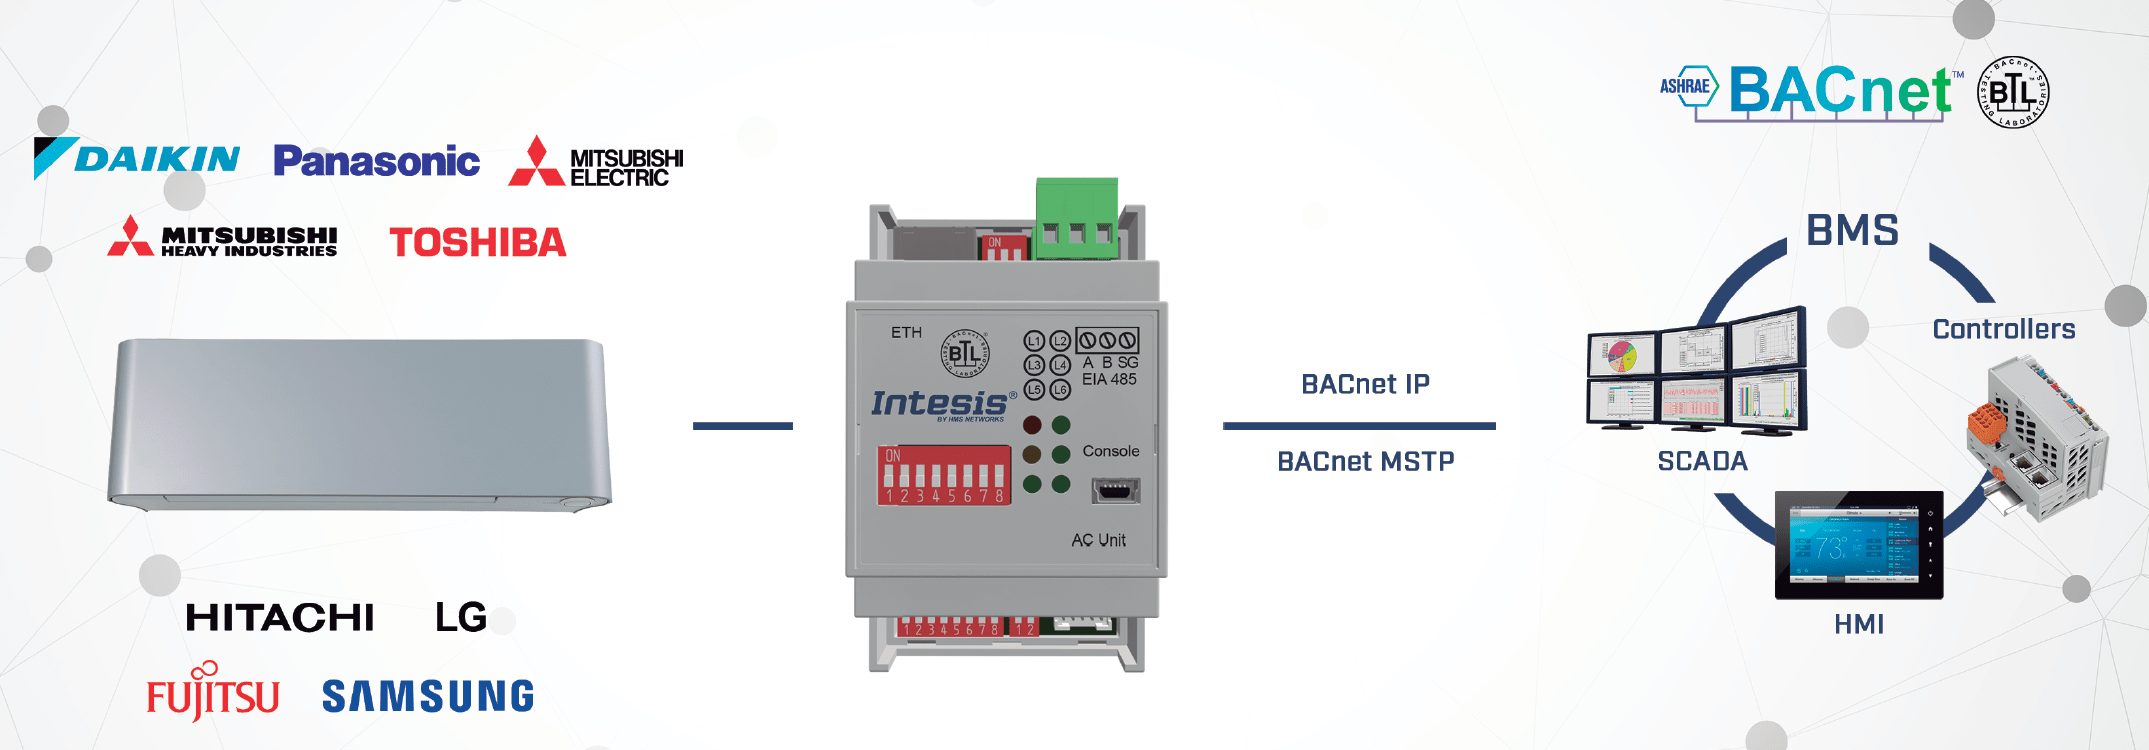 BACnet solution for small and medium installations